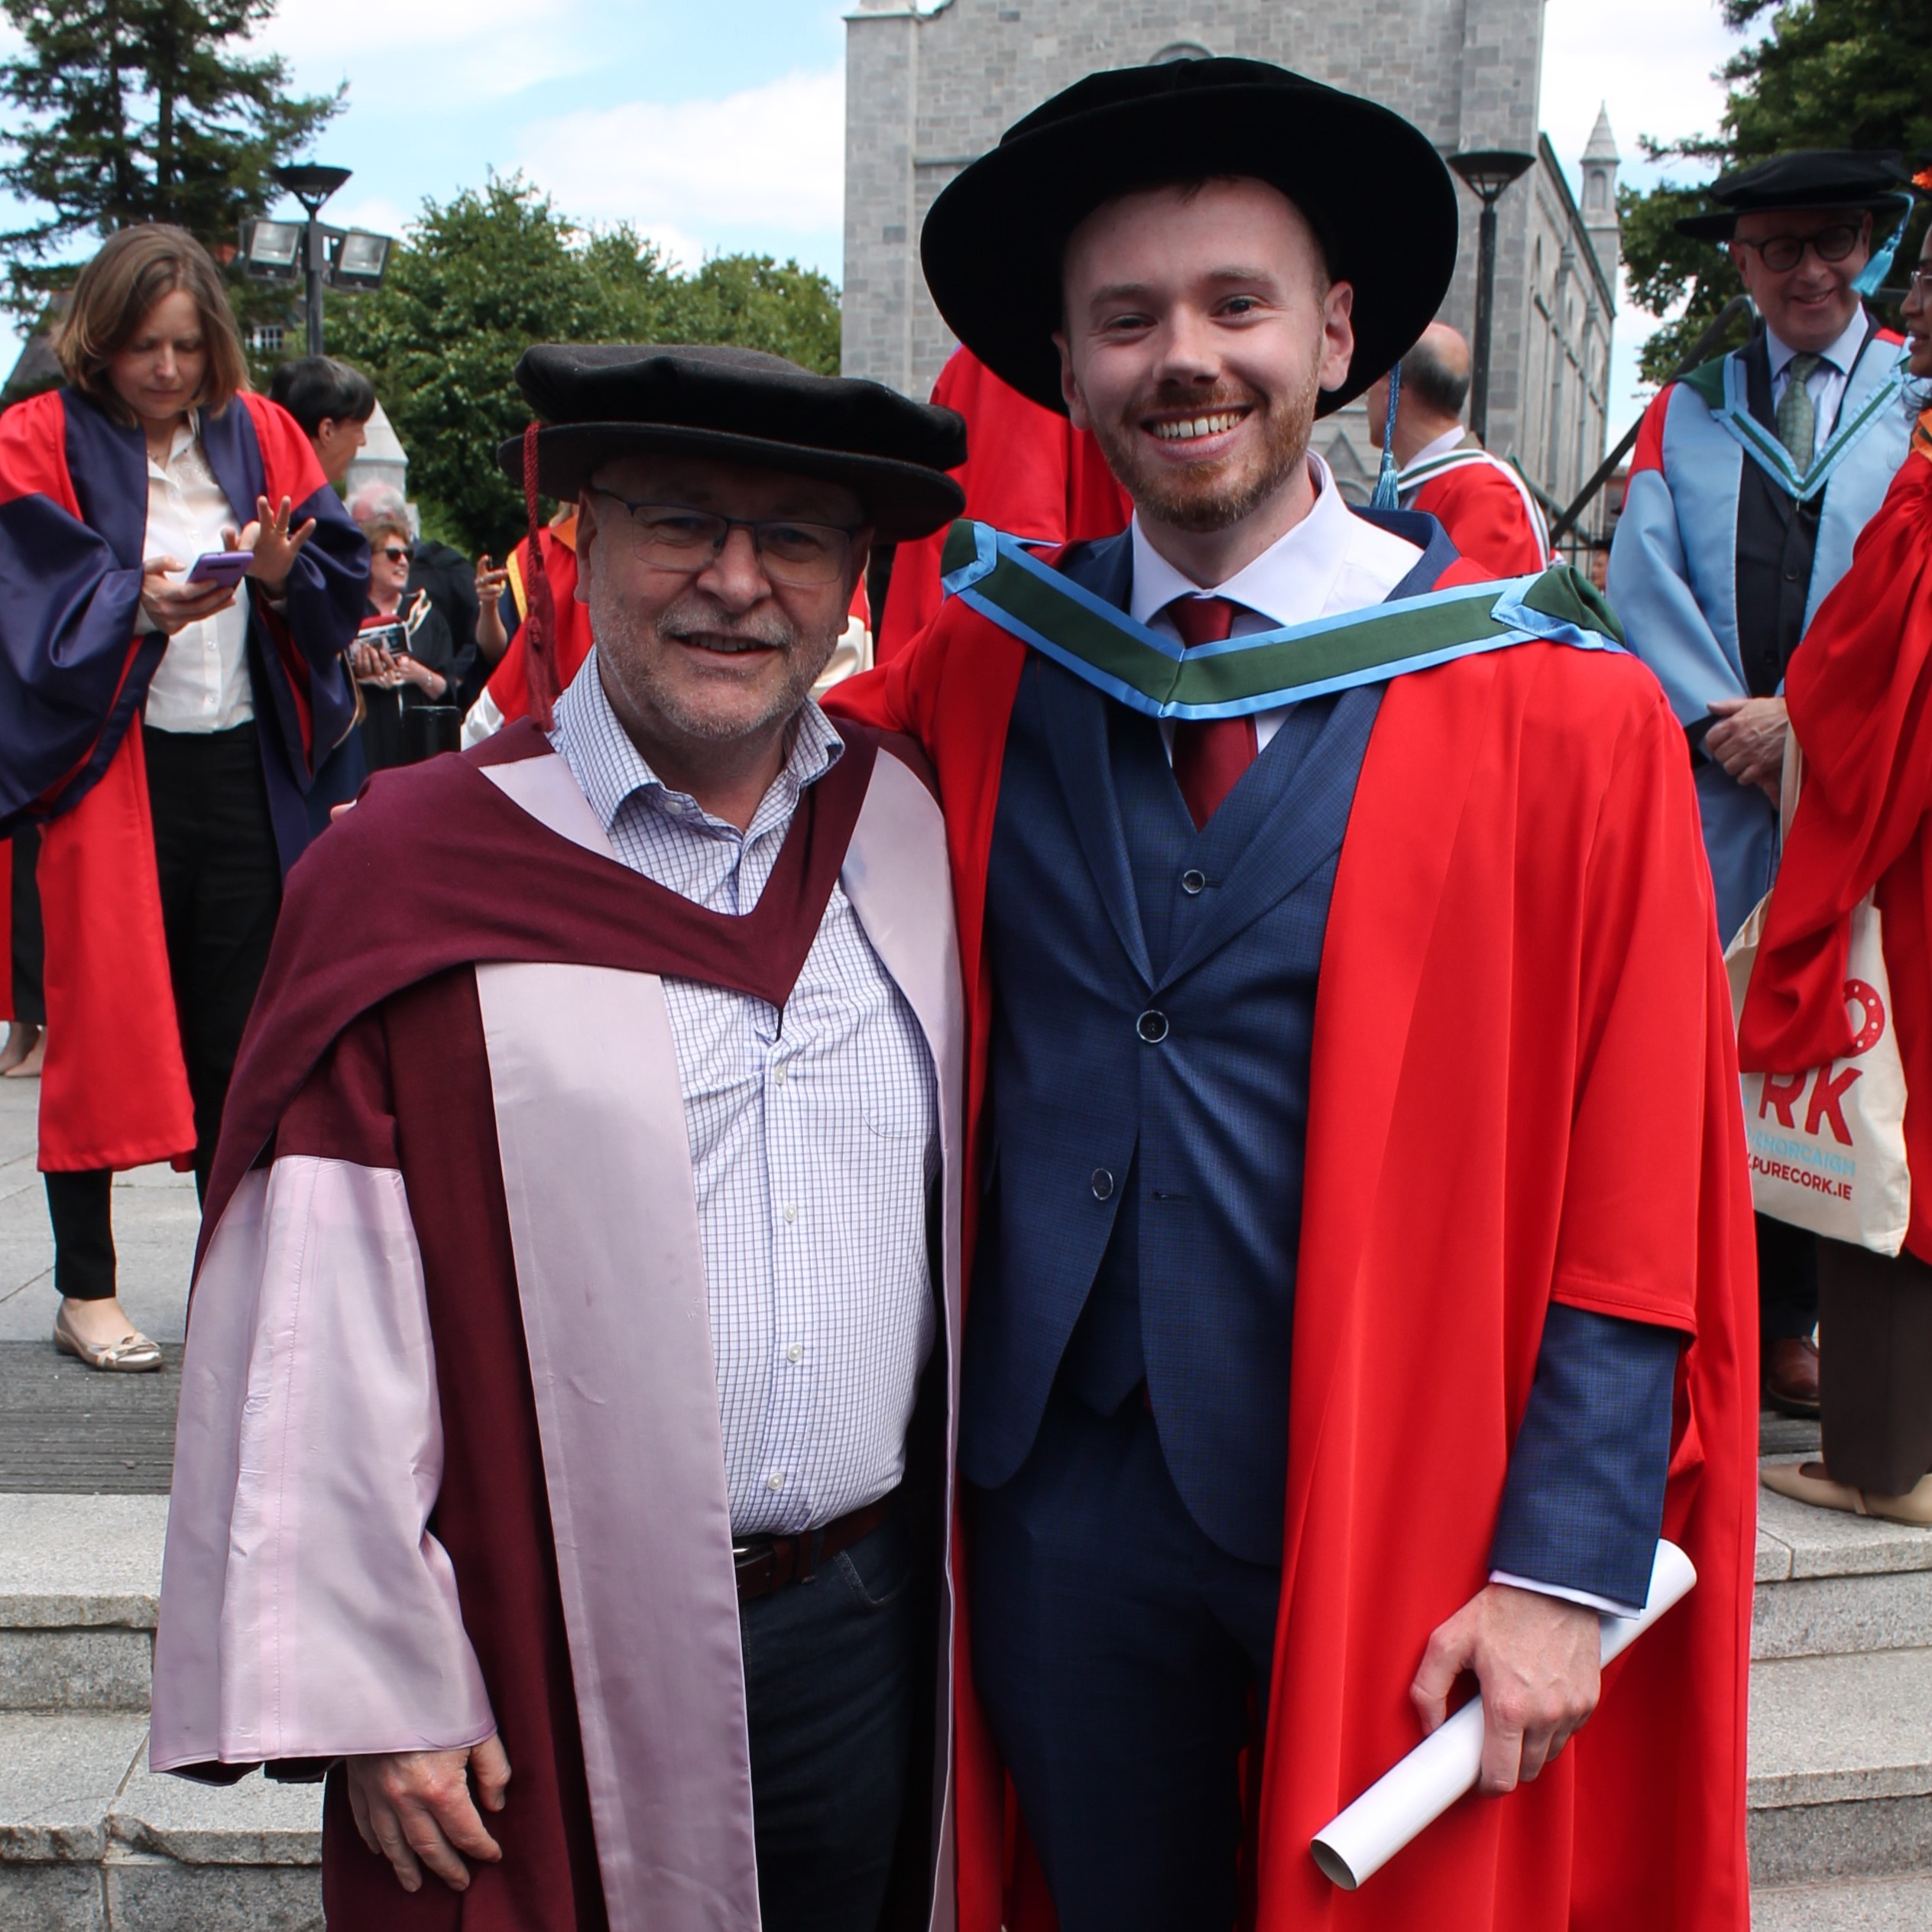 Graduate Dr Niall O'Sullivan and his supervisor, Prof. John Wenger, pose among the conferring crowd.